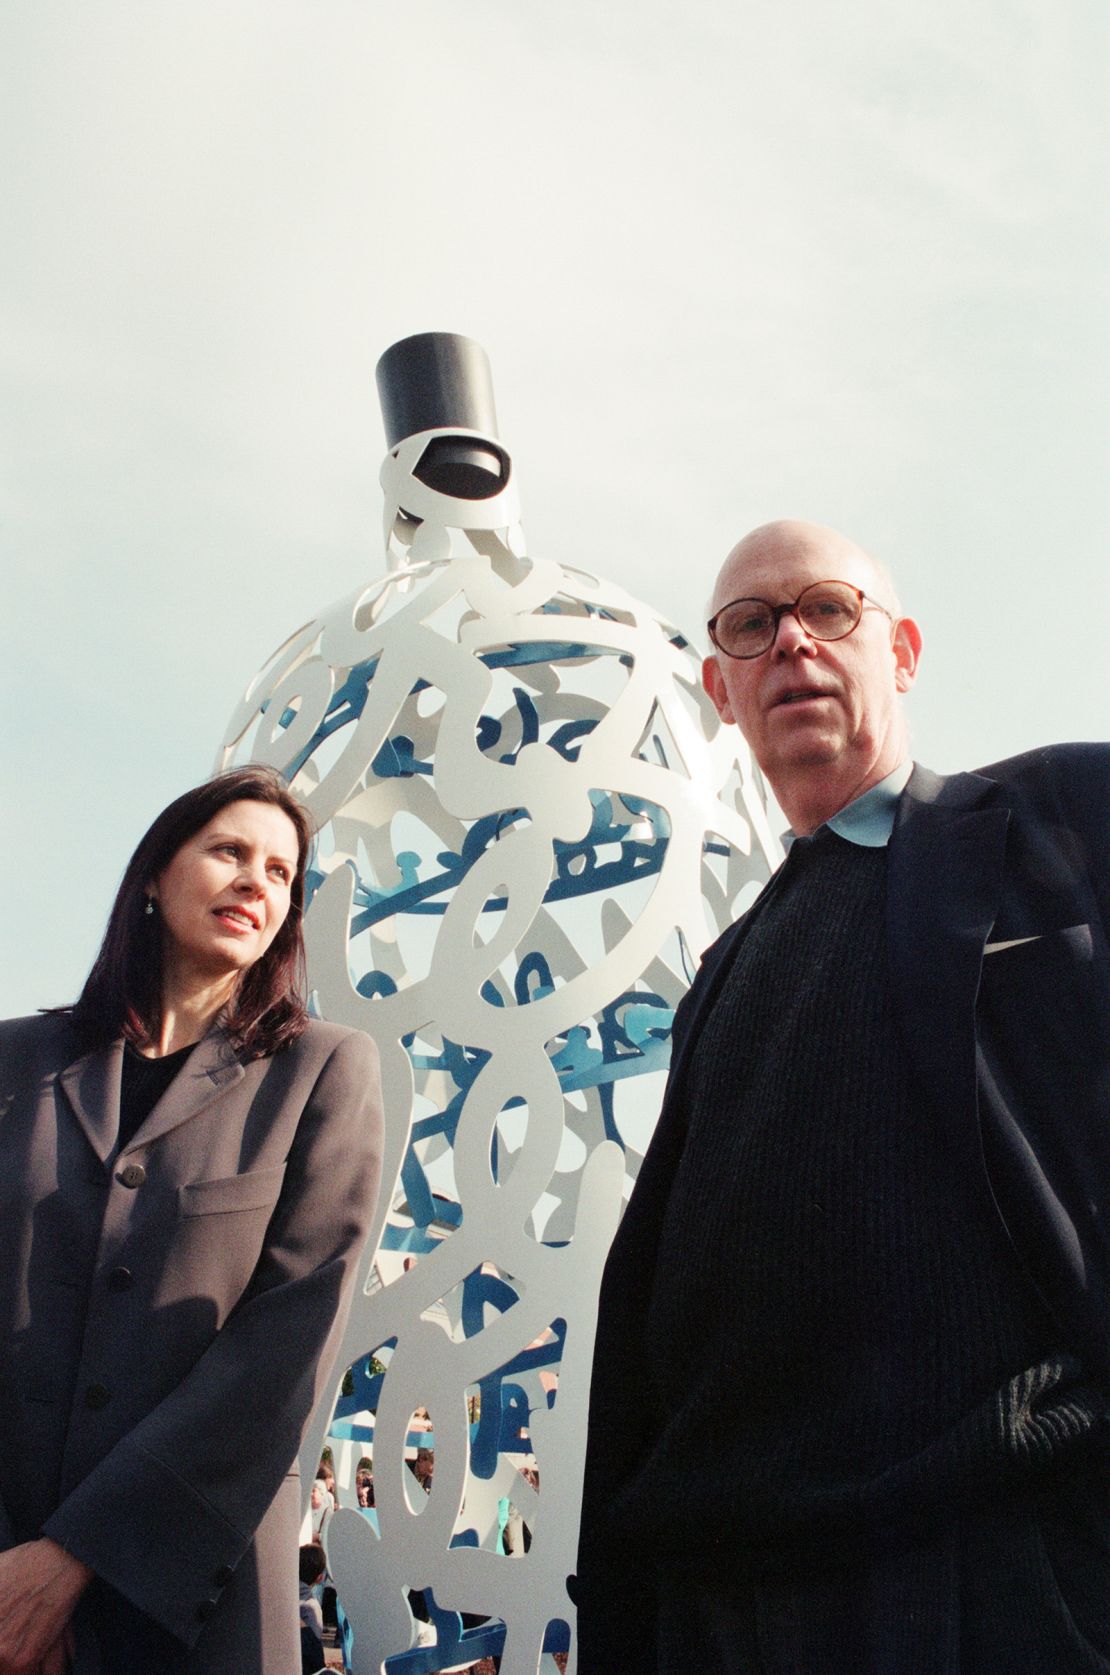 Oldenburg and van Bruggen at the launch of their public sculpture "Bottle of Notes" in 1993.